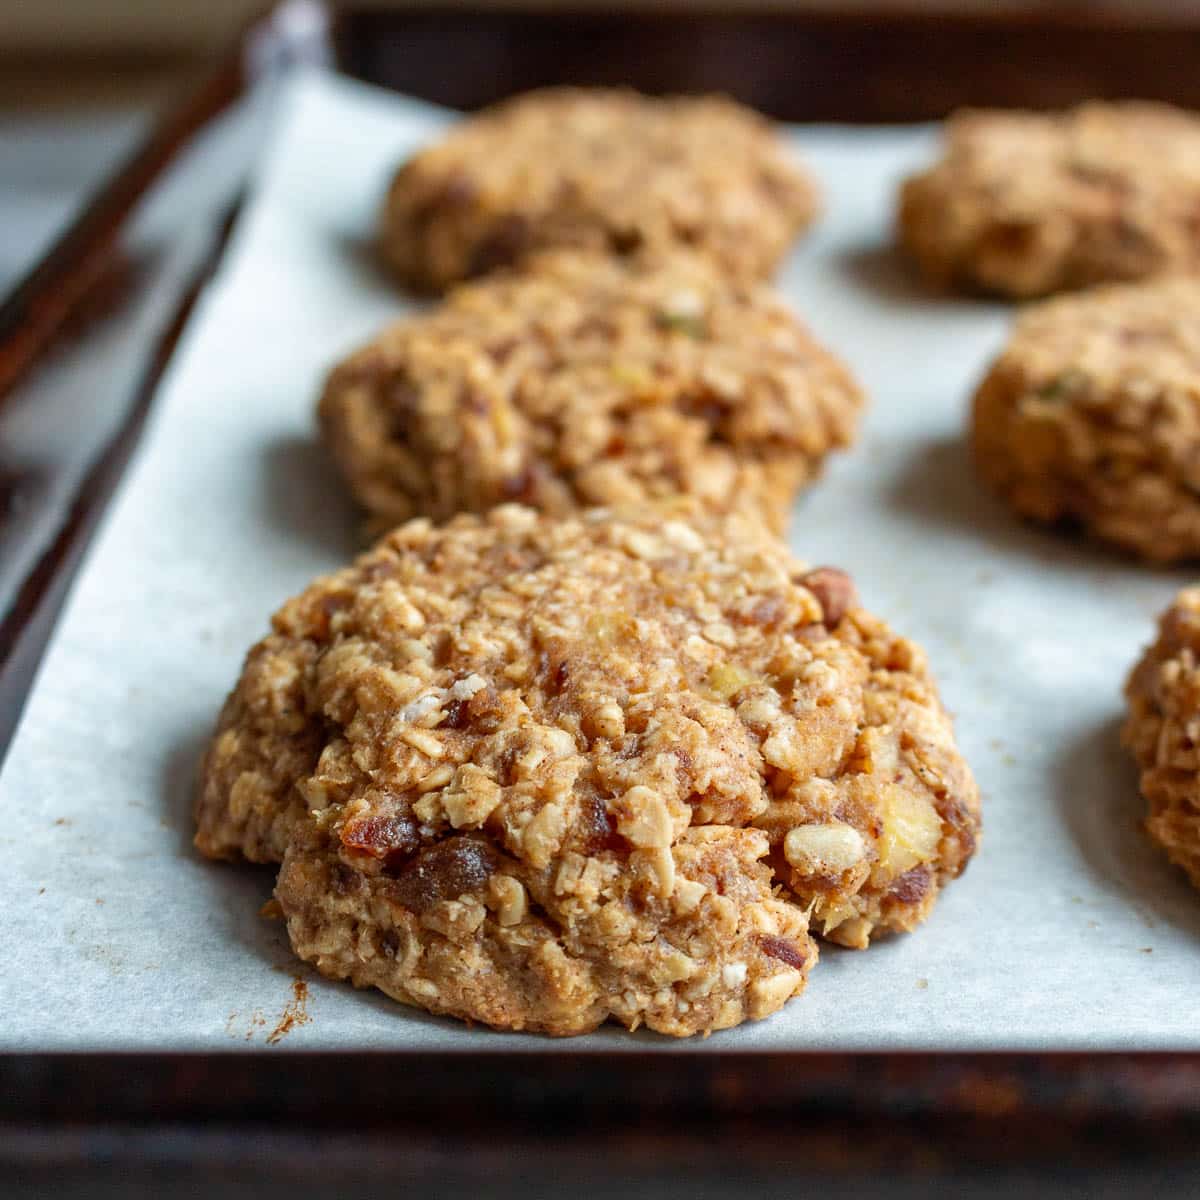 Baked oat cookies with dates resting on the cookie sheet after baking.